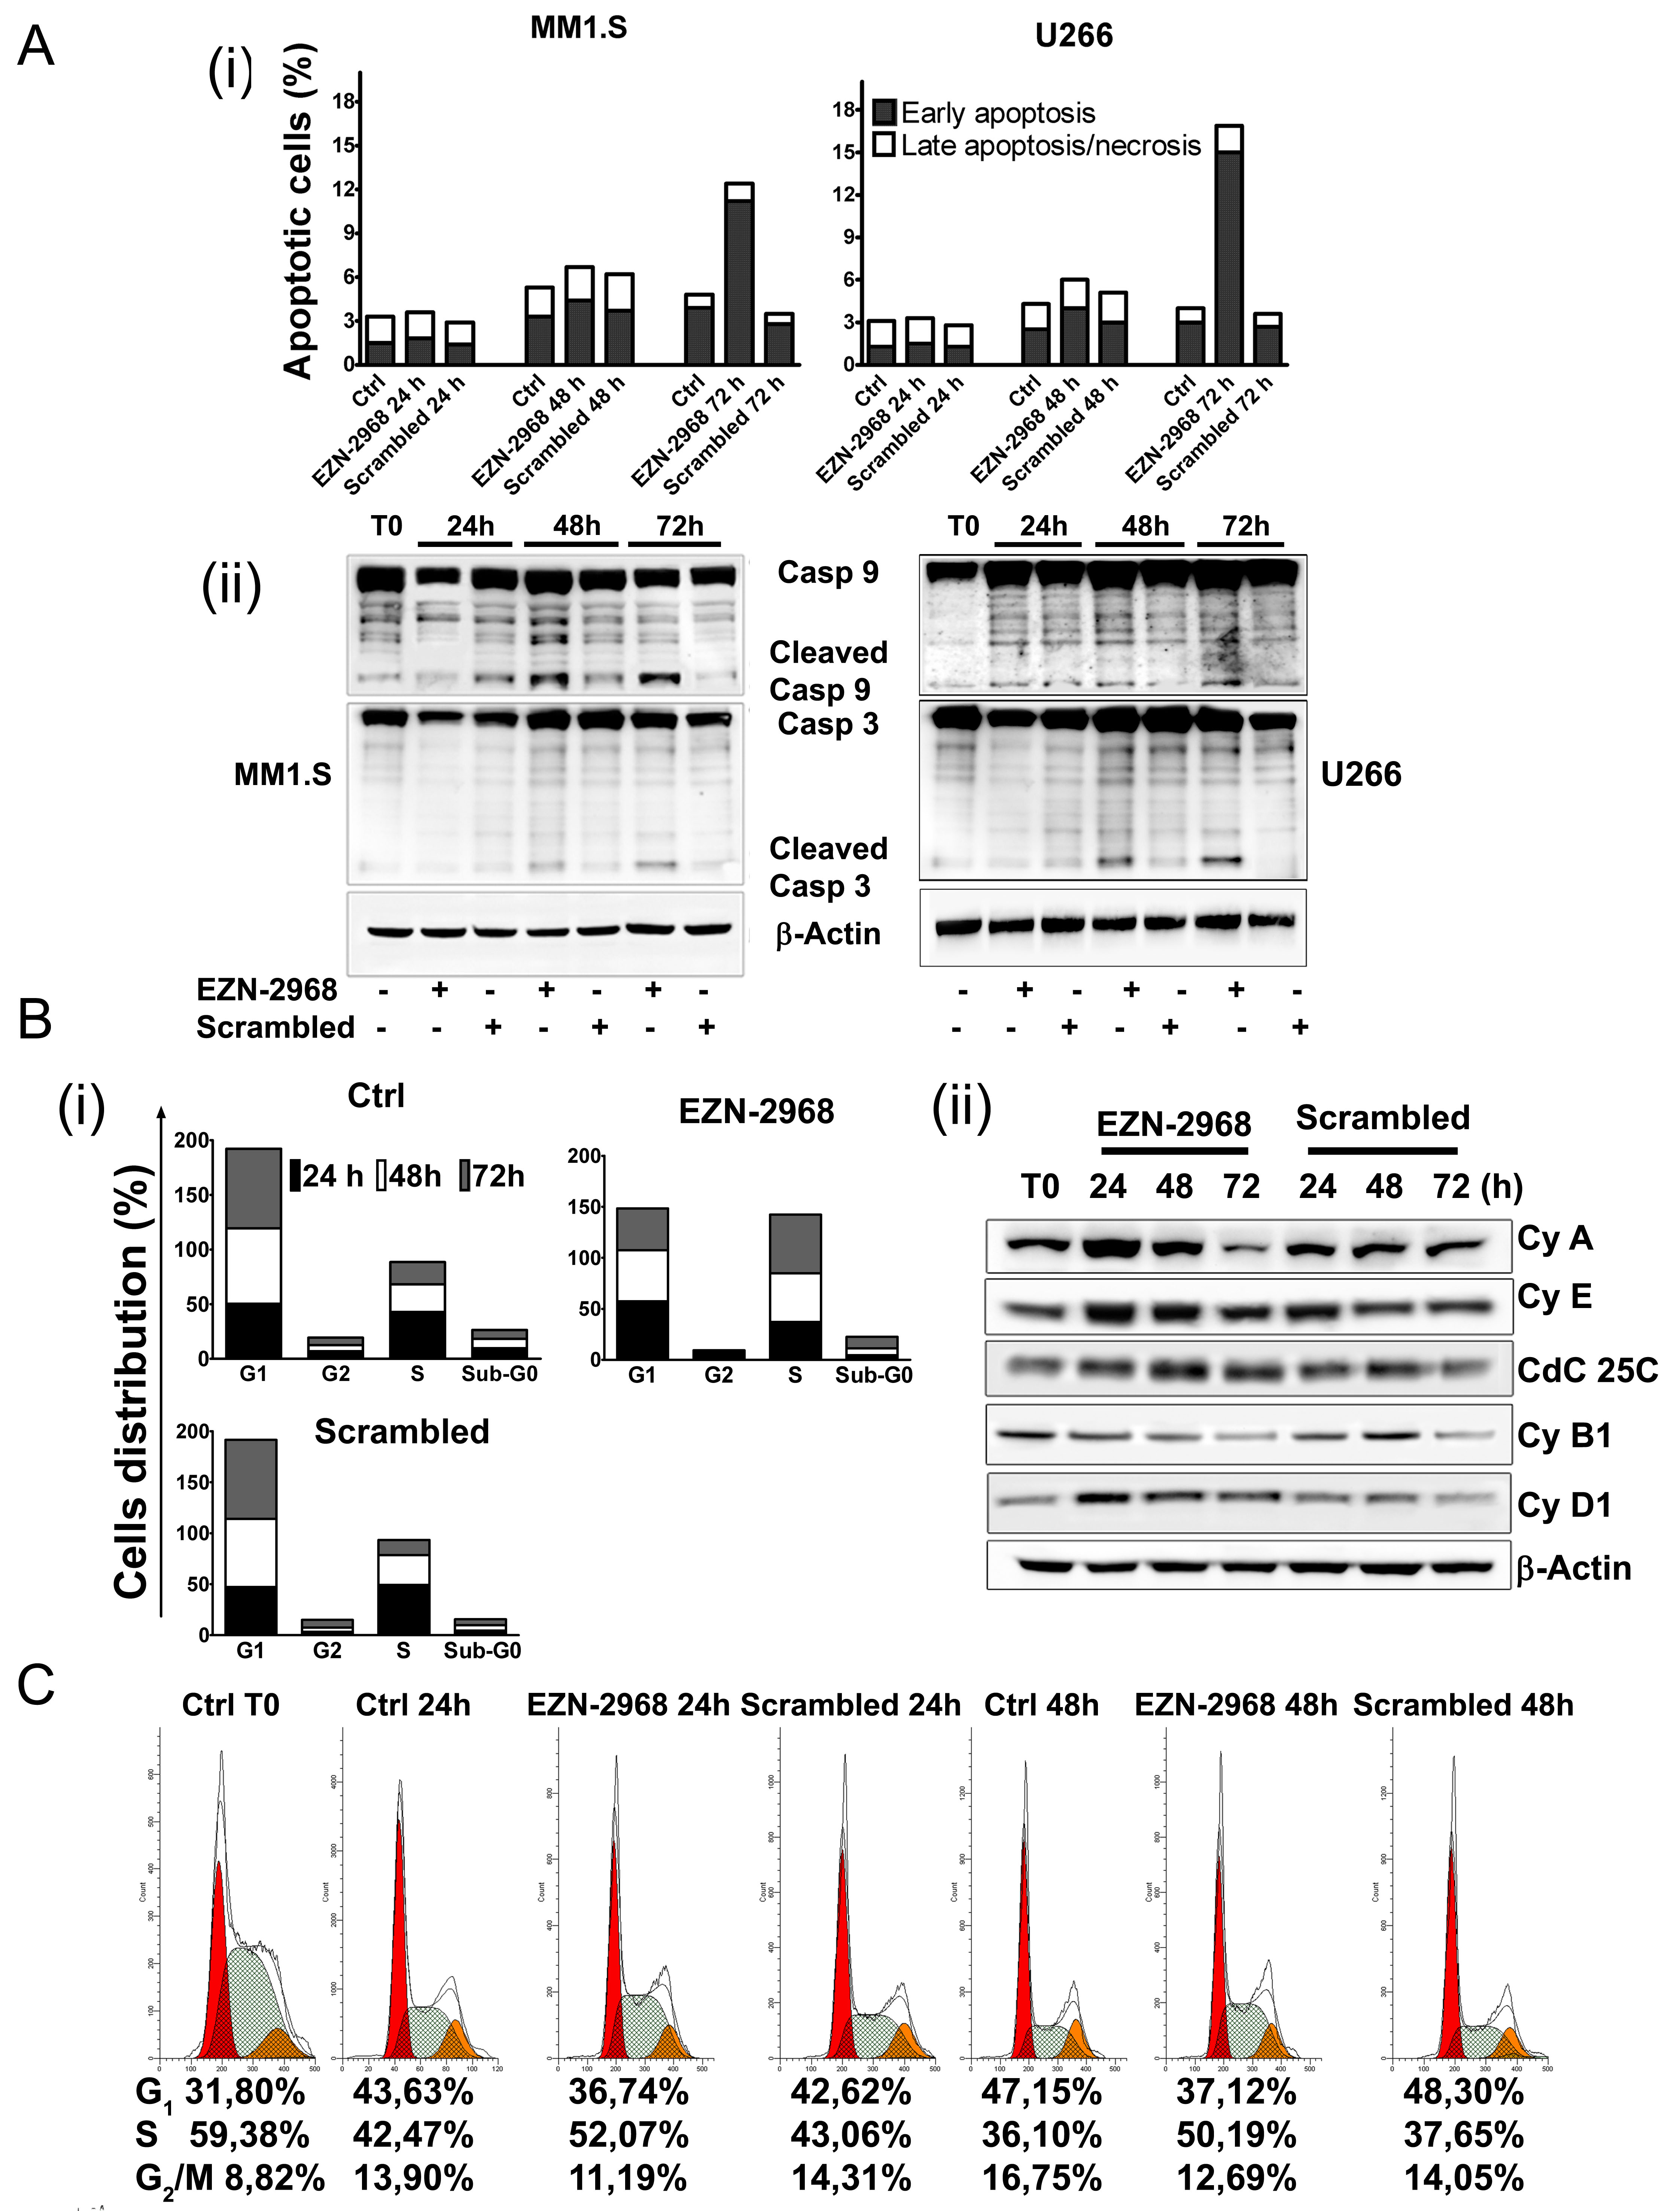 Effect of EZN-2968 on apoptosis and cell cycle on MM1.S.